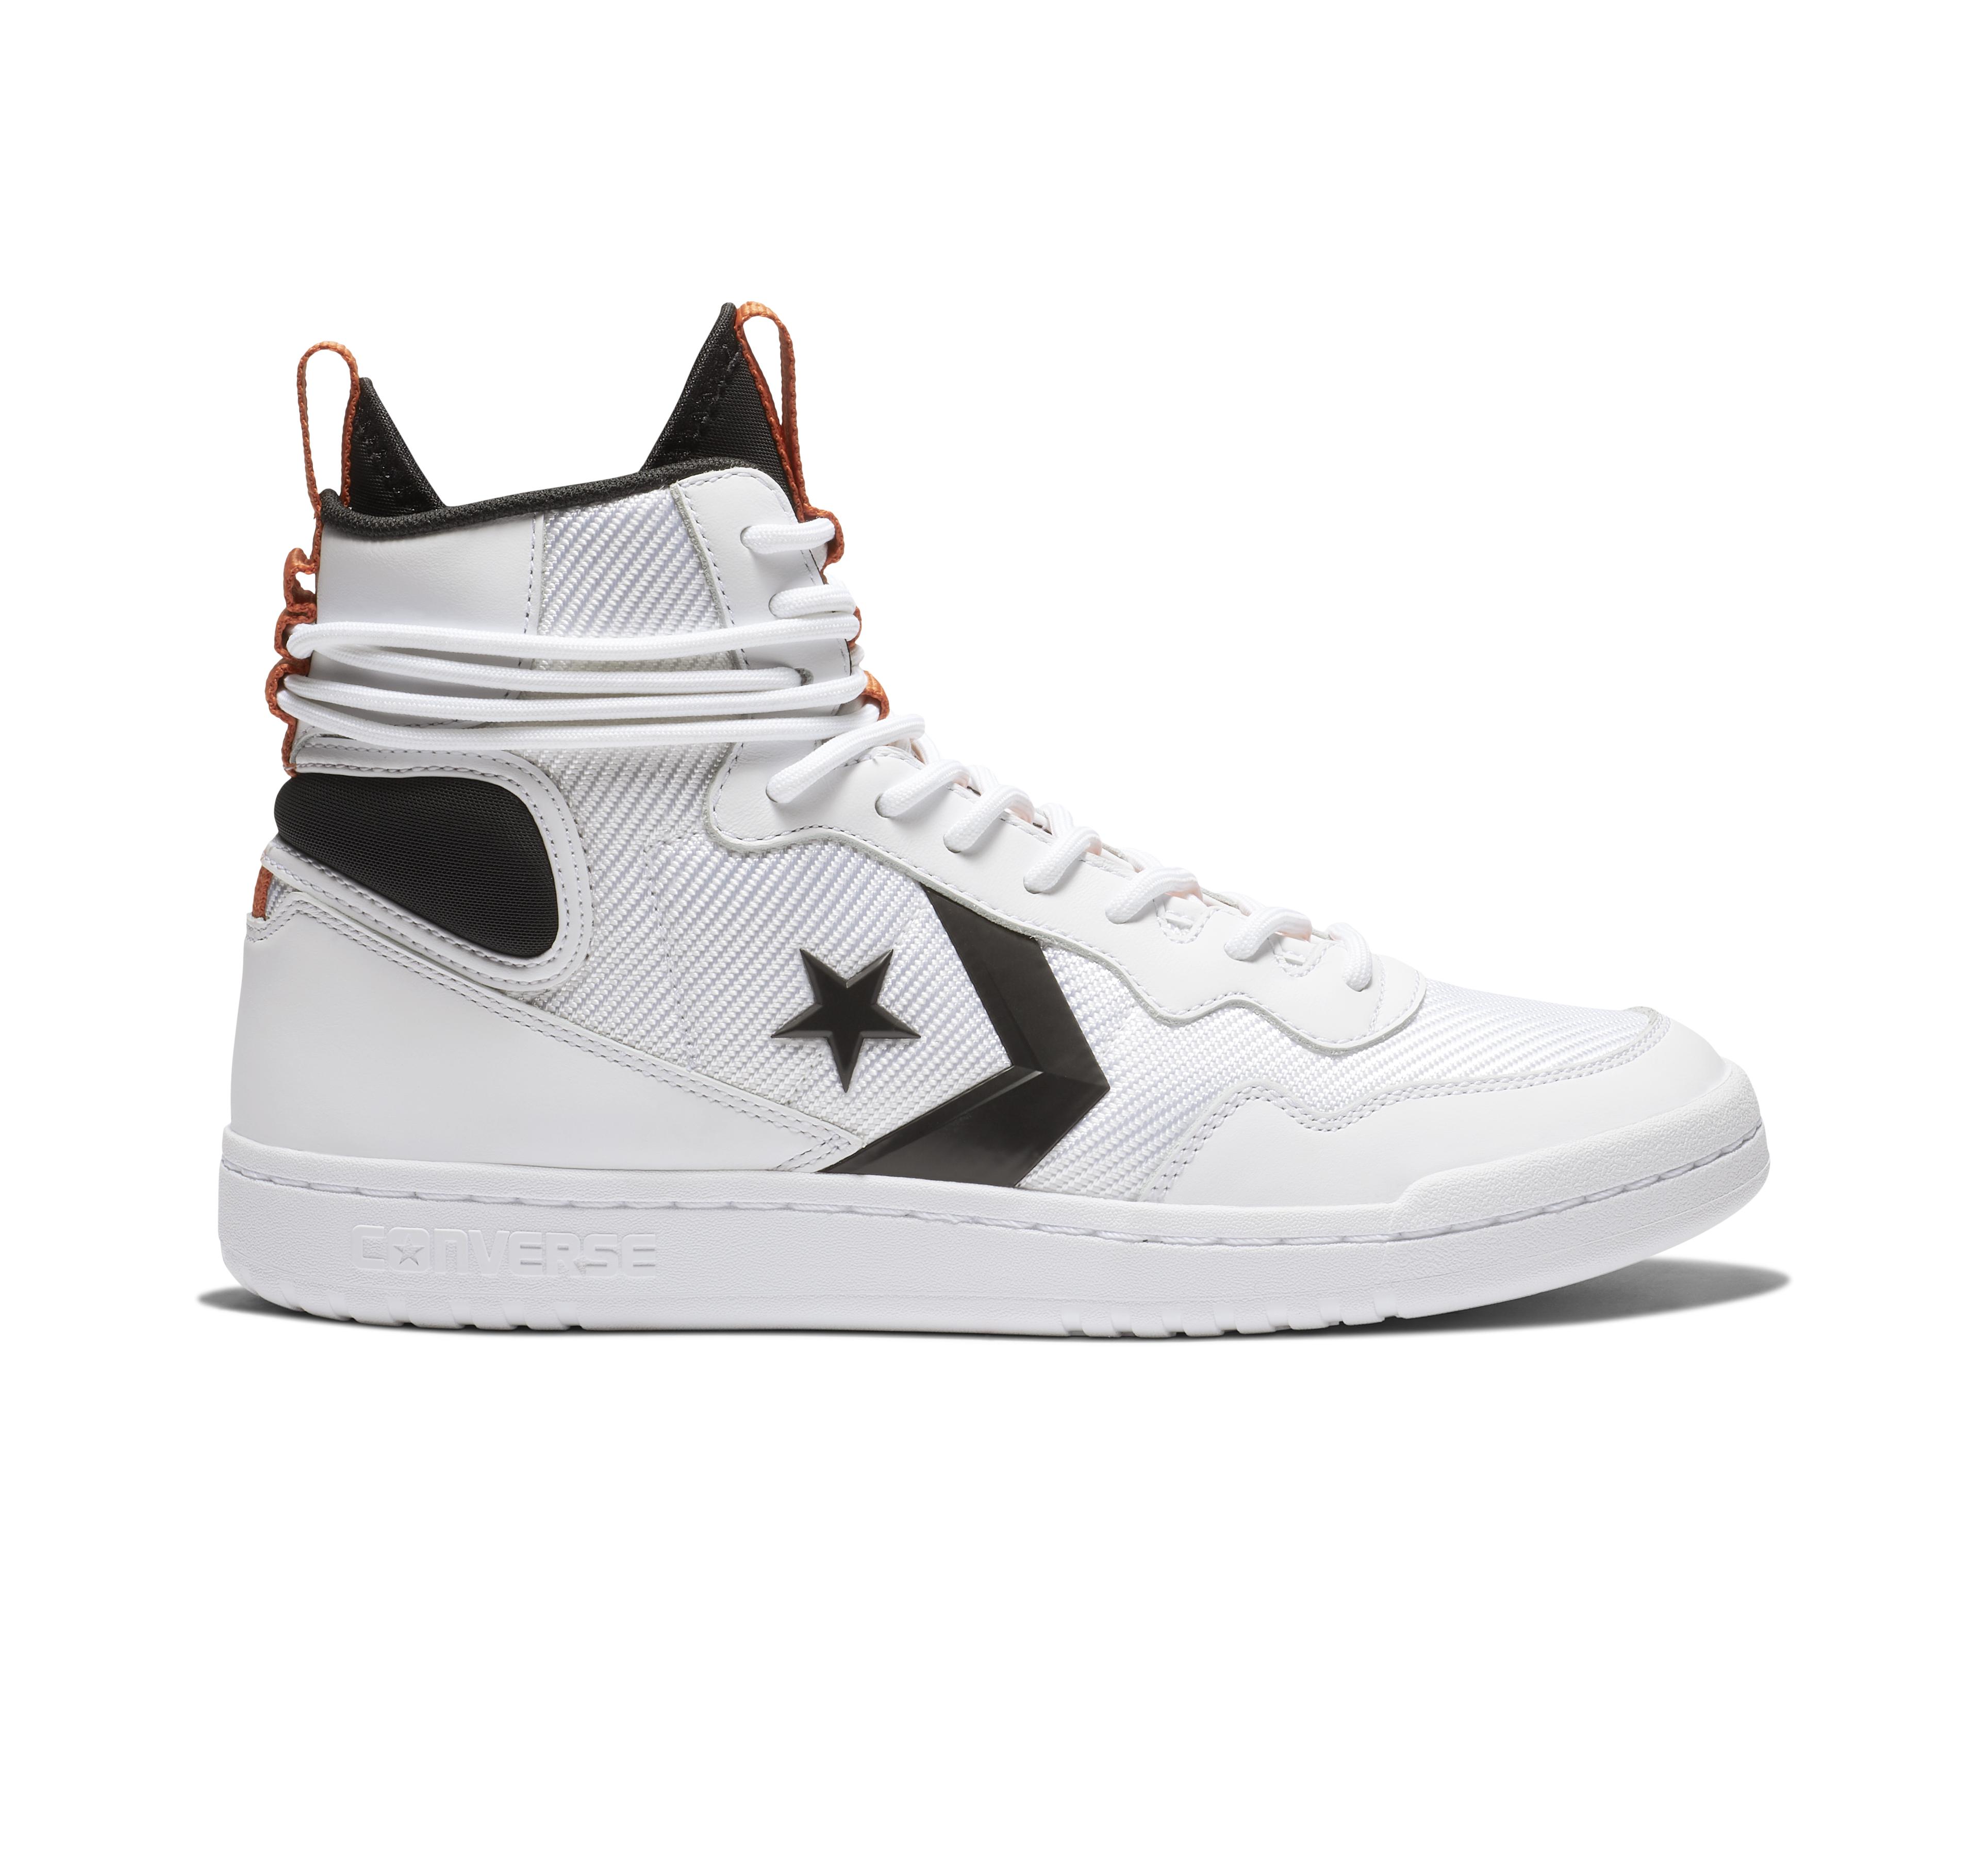 Converse Fastbreak Cascade Leather High Top in White for Men - Lyst